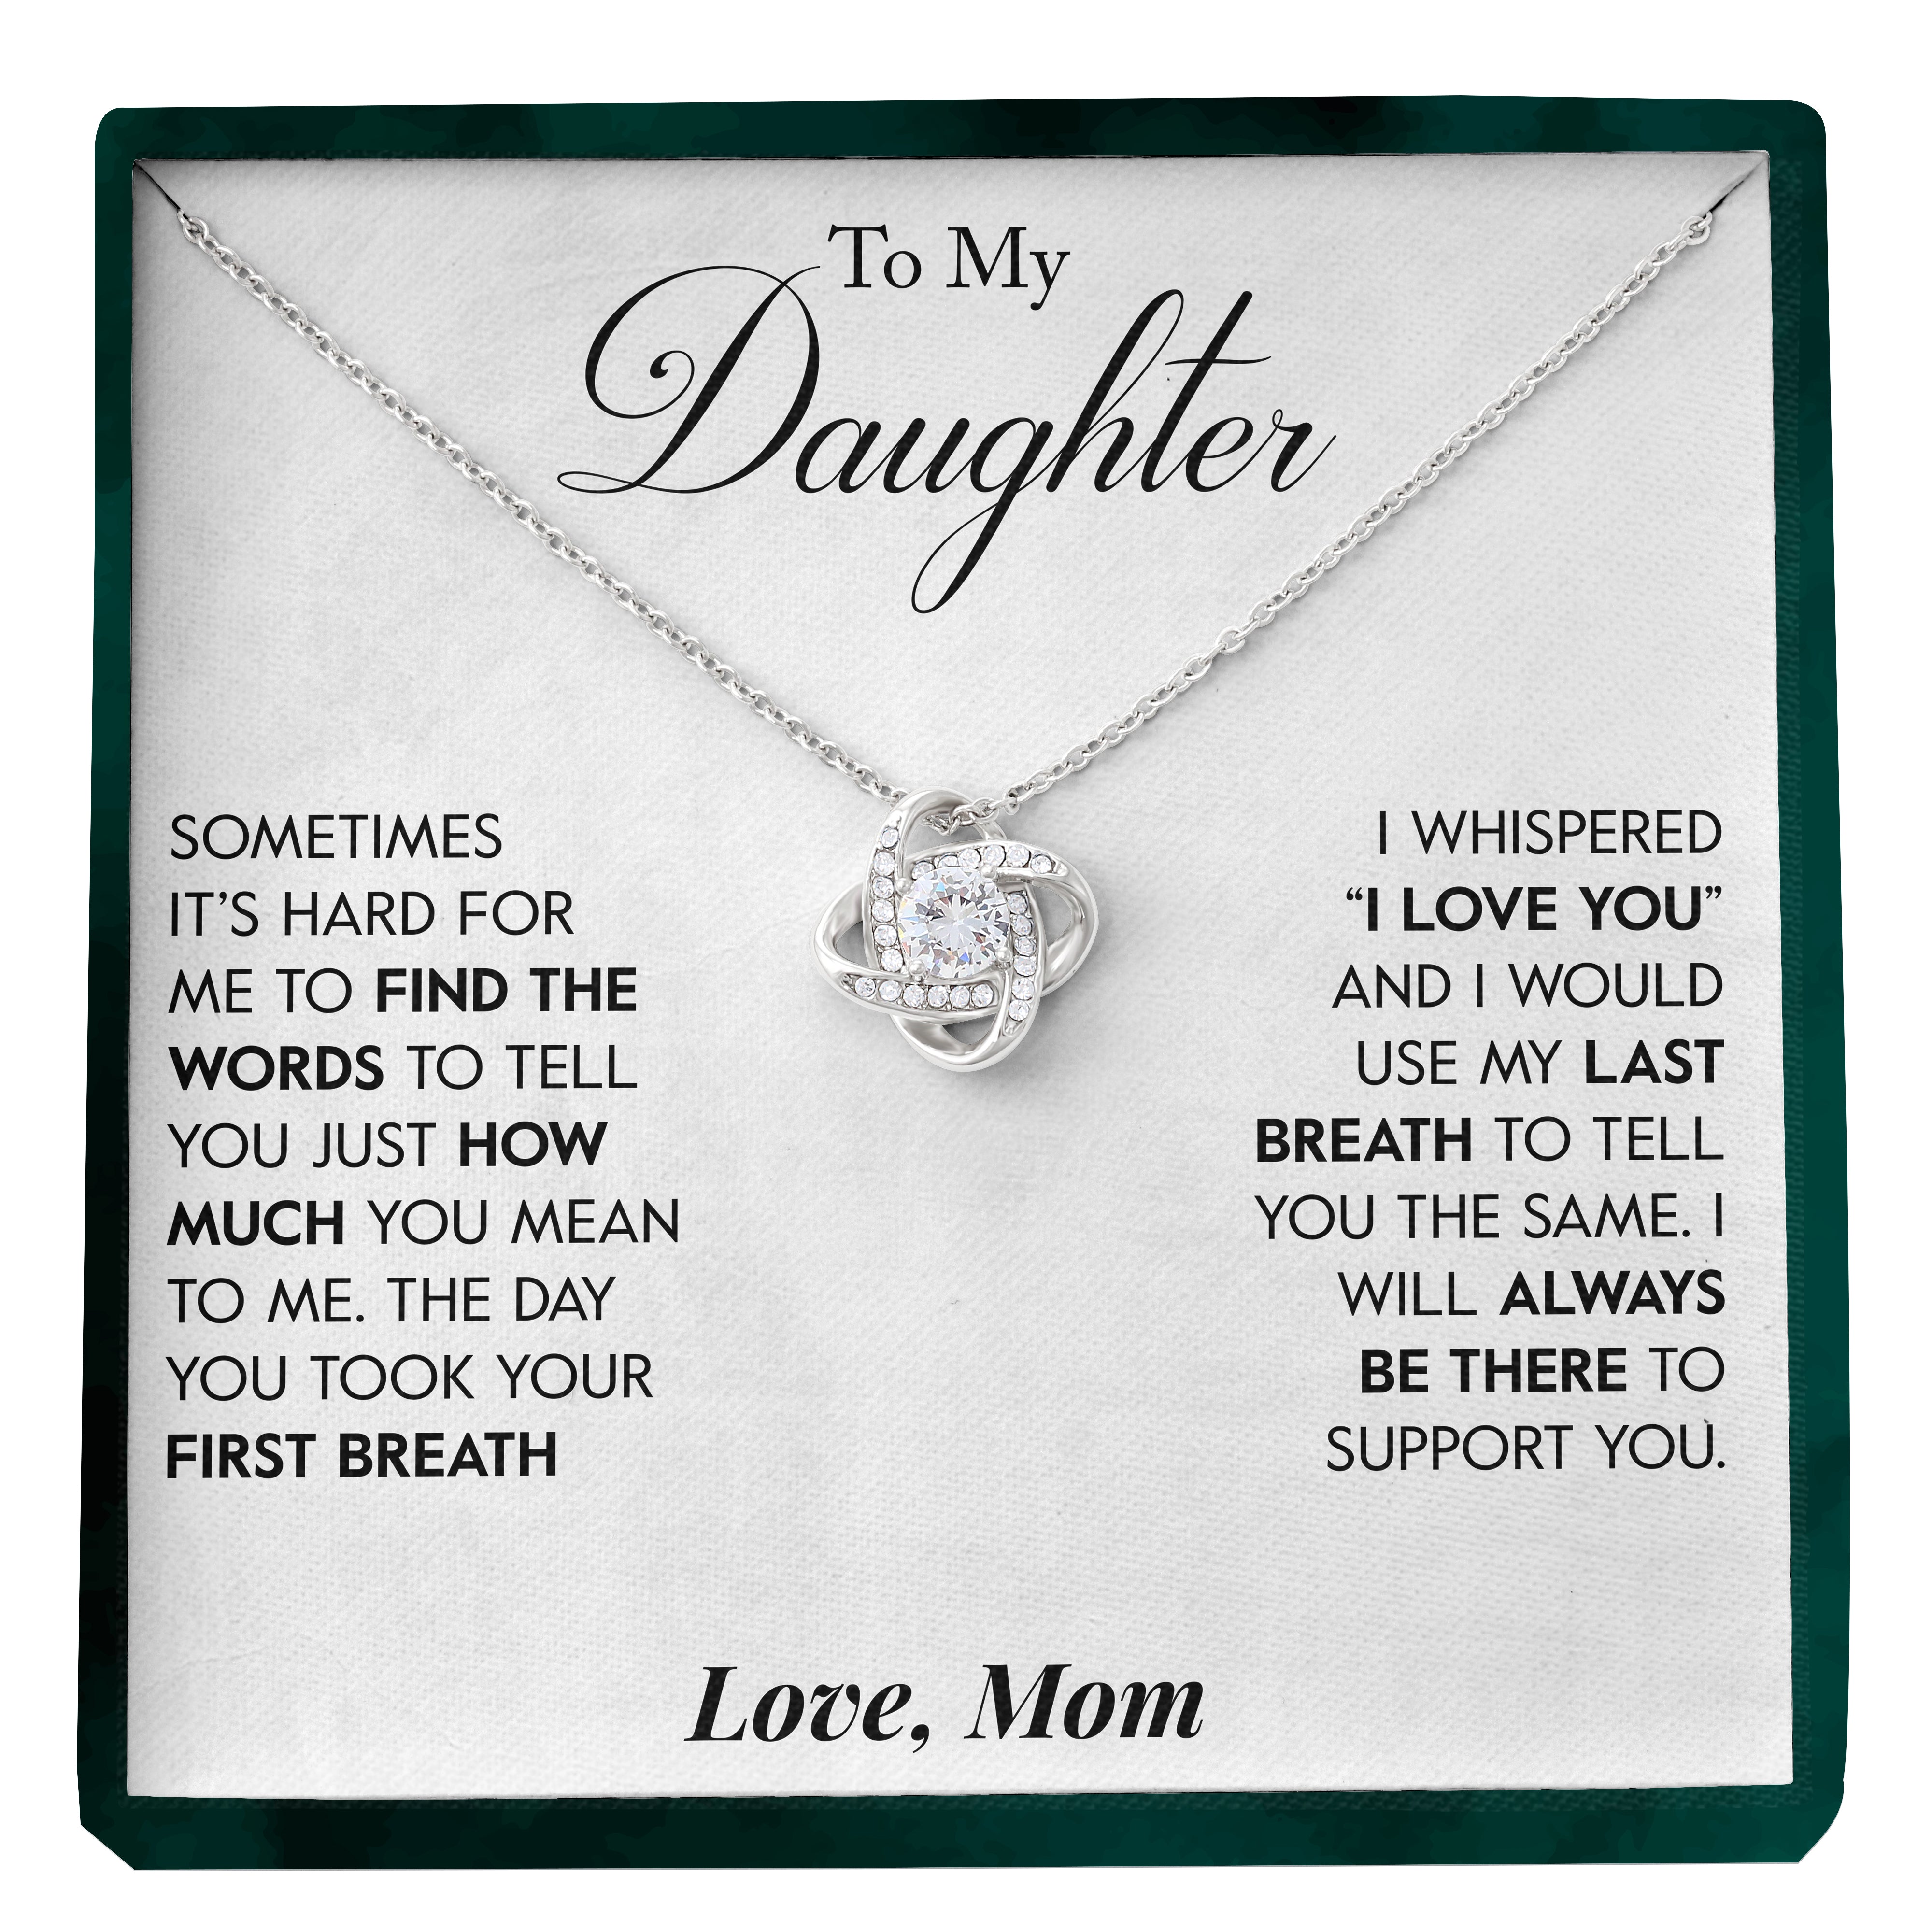 To My Daughter | "My Last Breath" | Love Knot Necklace